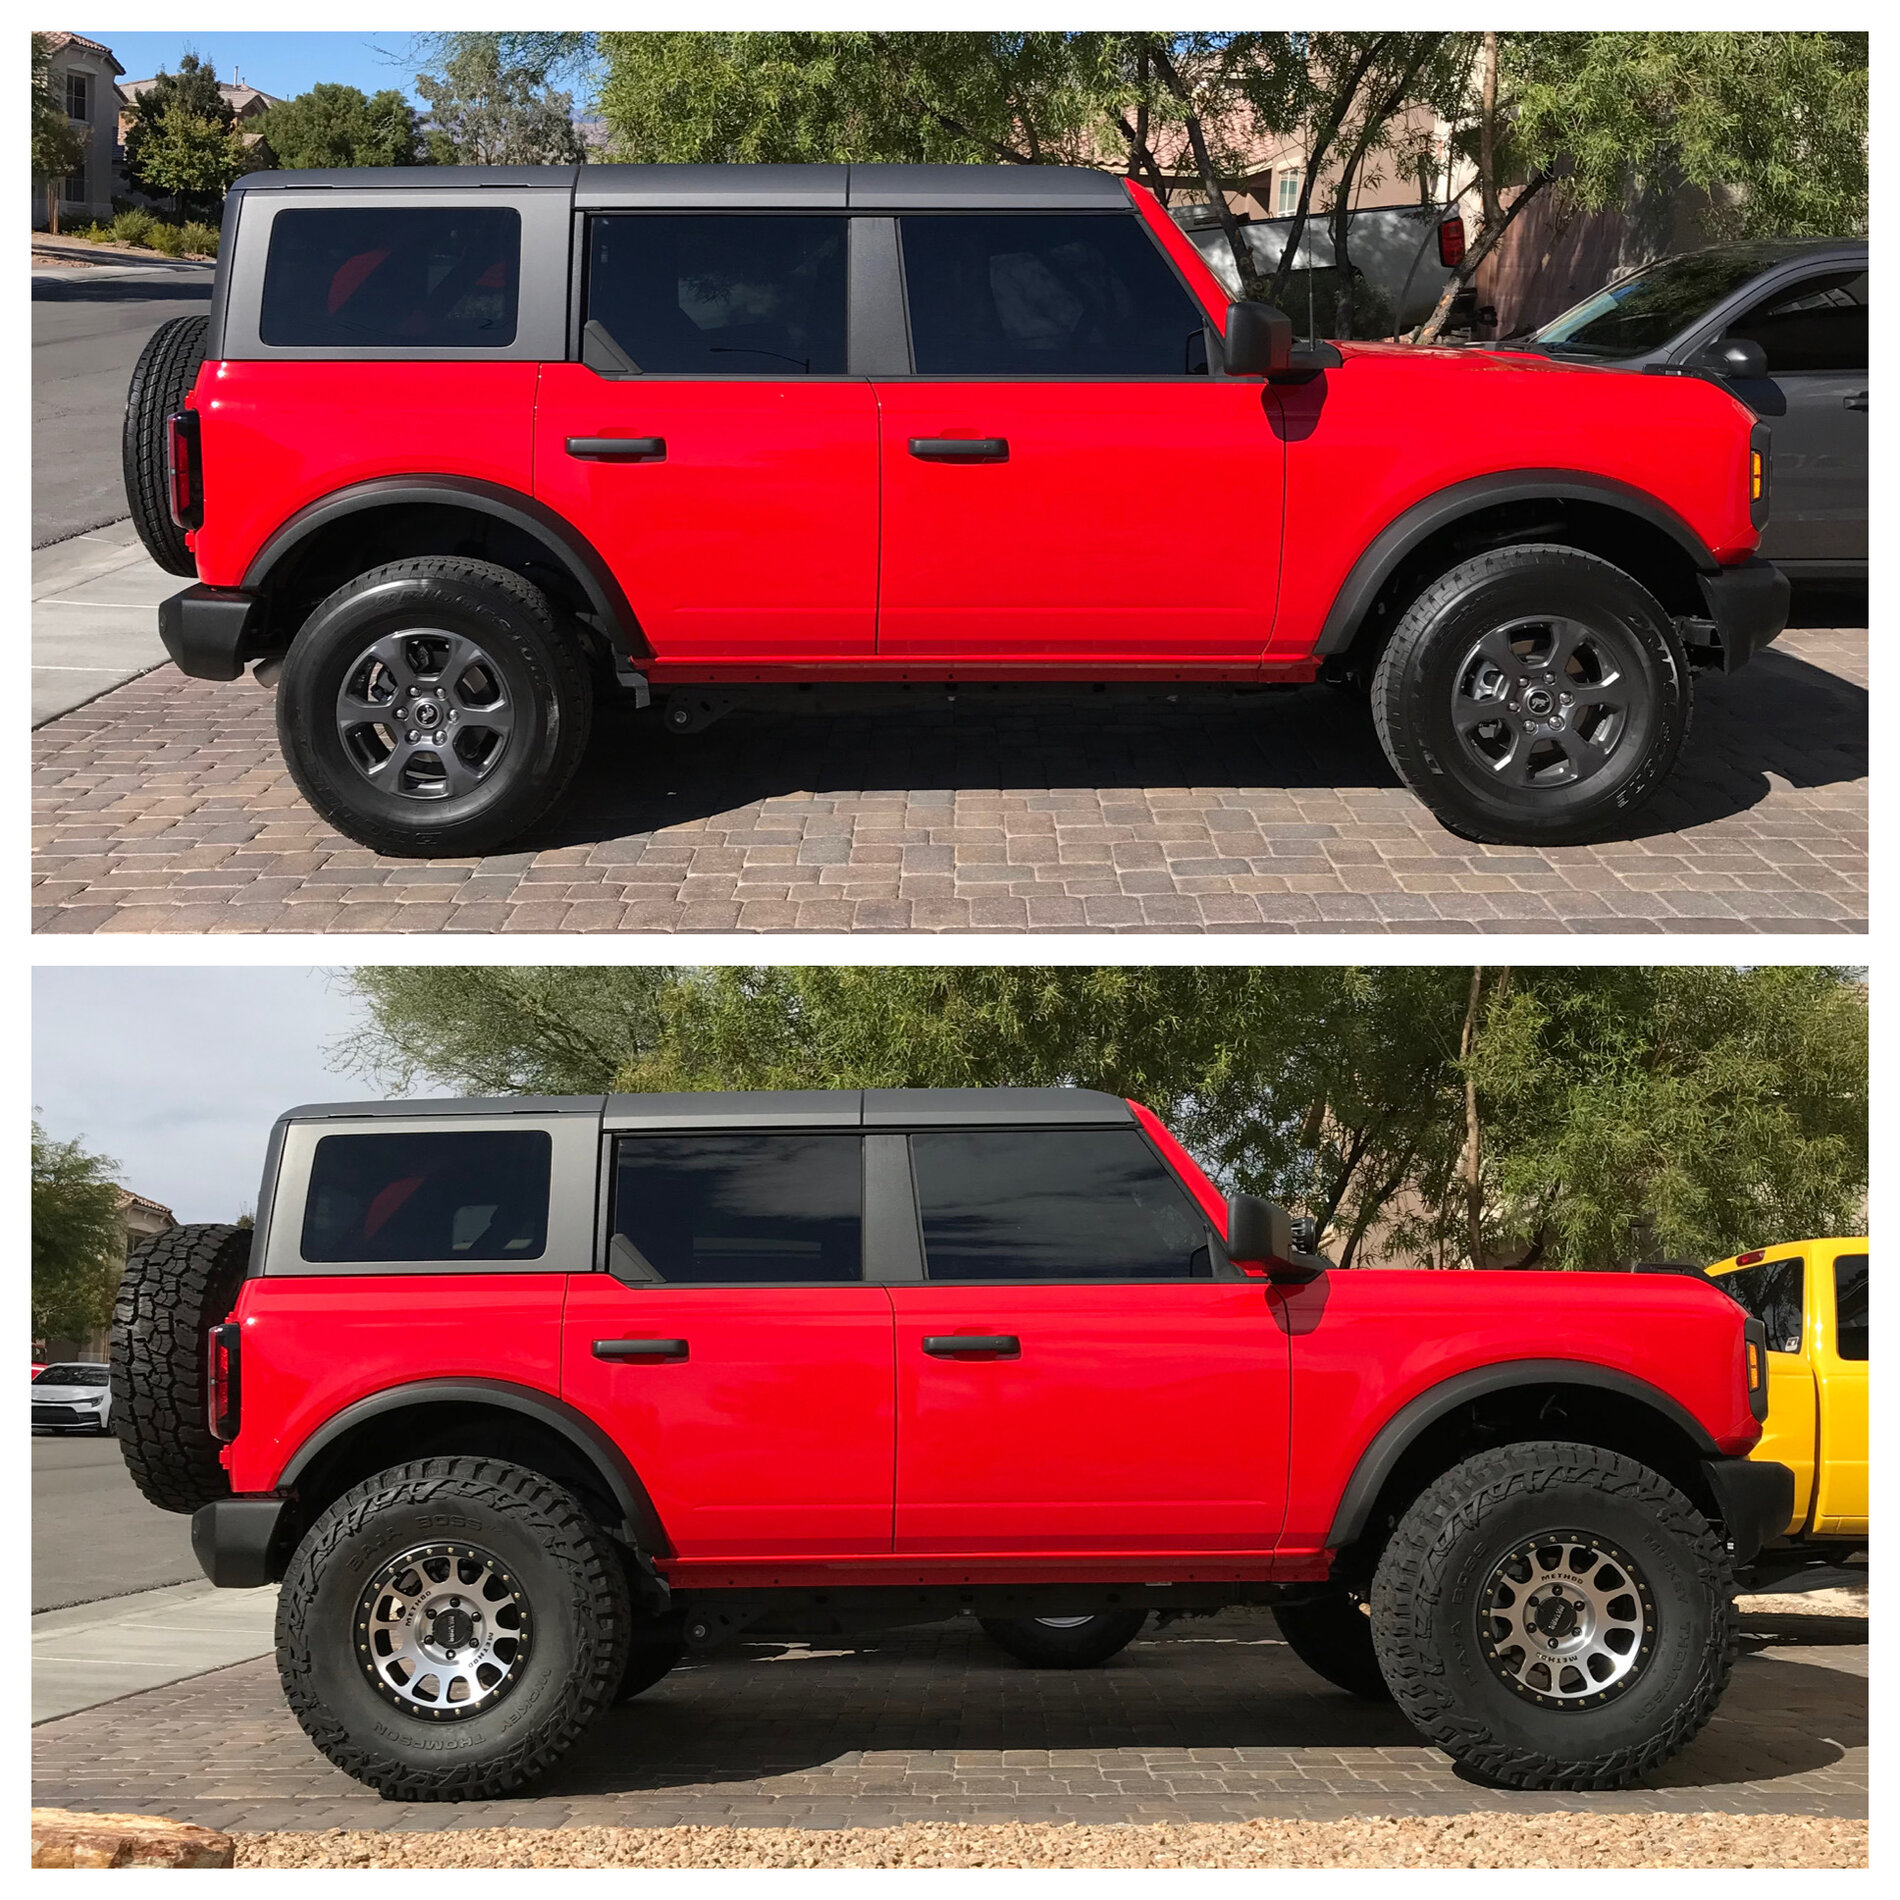 Ford Bronco Bronco6g HELP! Me pick a Color Velocity Blue or Race Red ? ? ? ? Post photos 8797A186-6BA2-4950-AD83-866BF51E827F